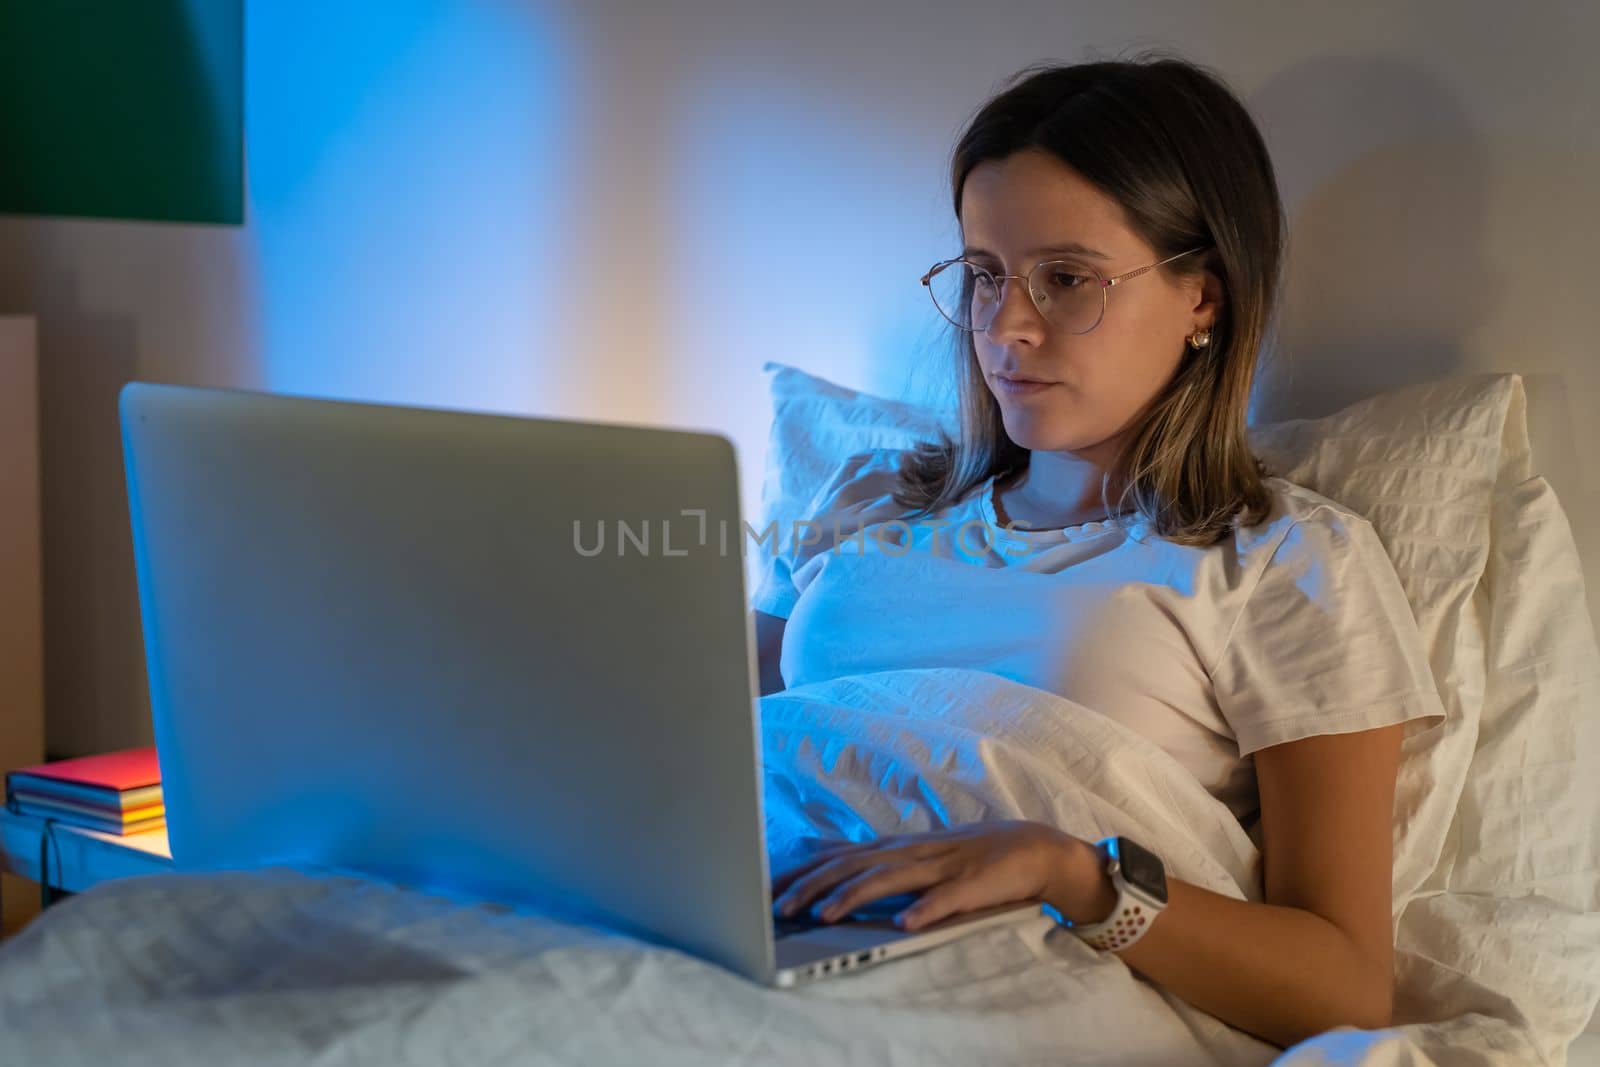 Beautiful young girl sitting on bed at night working with her laptop in the middle of the night. by PaulCarr